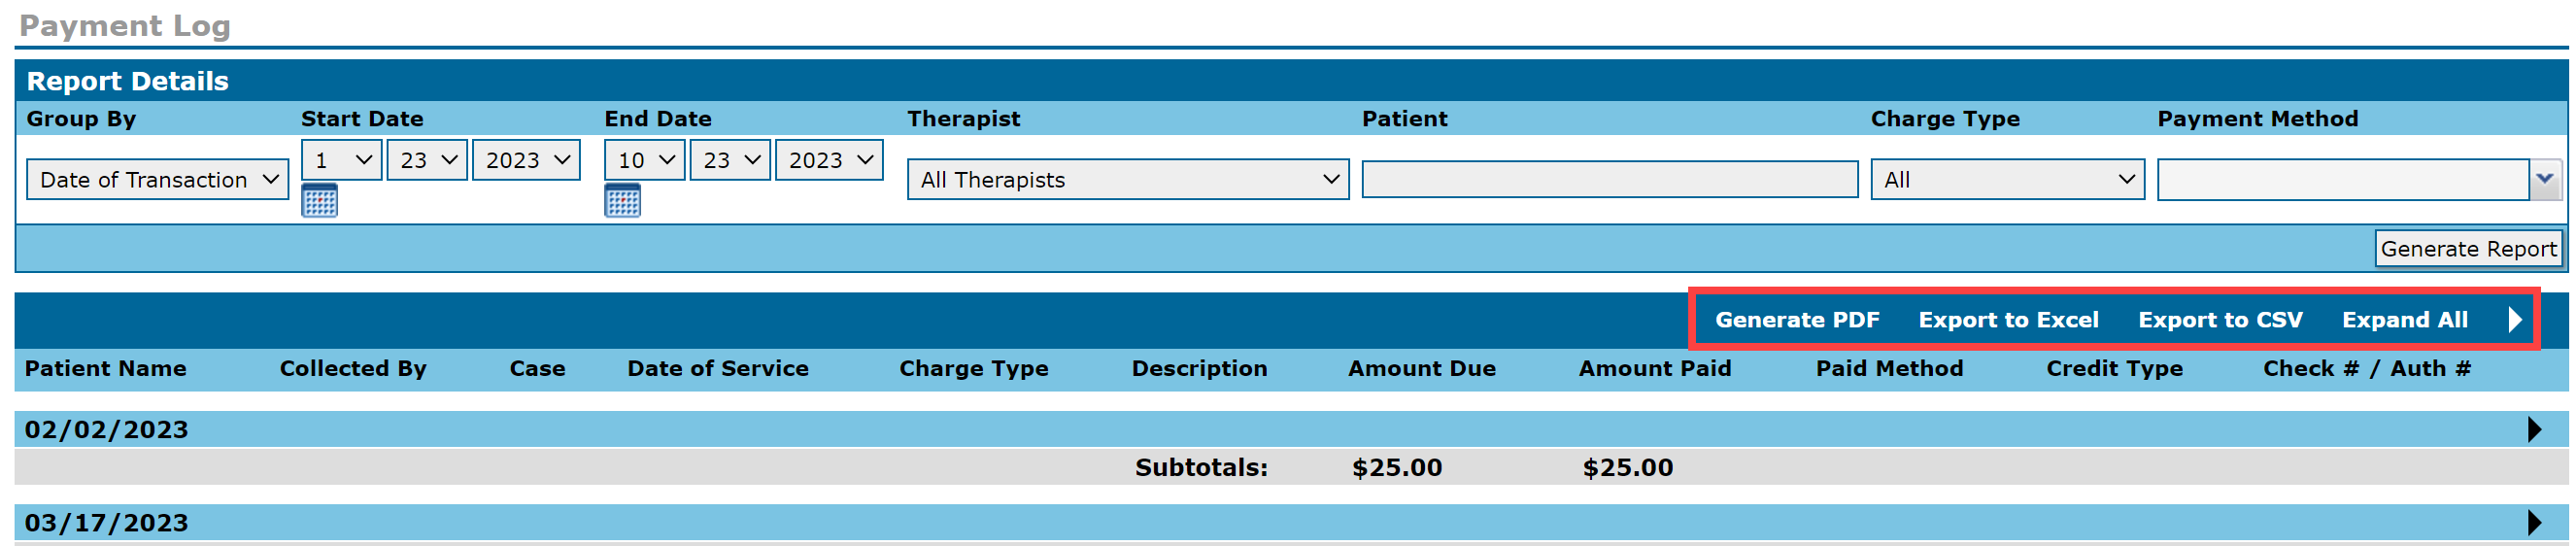 EMR_Reports_Payment Log_Report Action Buttons